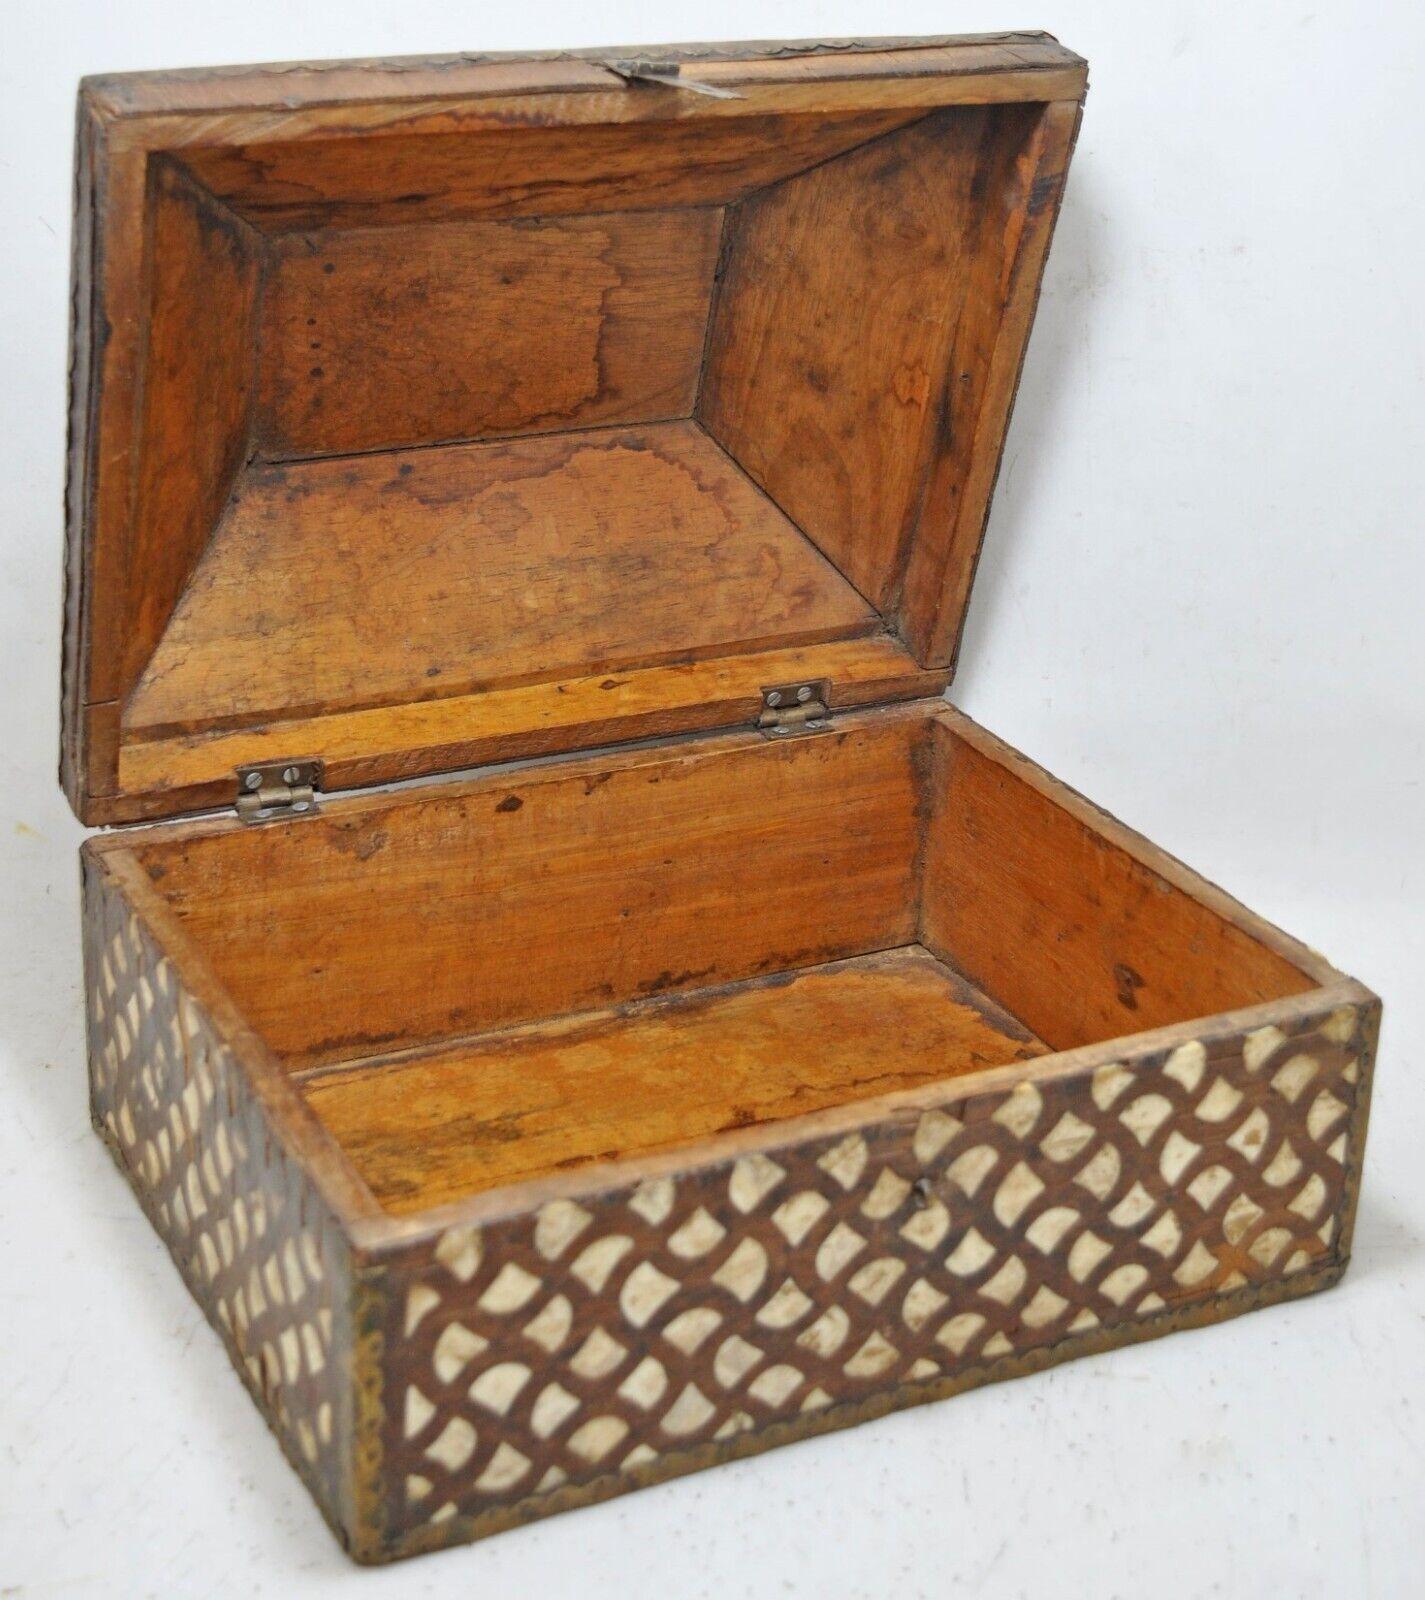 Antique Hand-Crafted Decorative Box with Distinctive Bone Inlay Pattern  For Sale 1